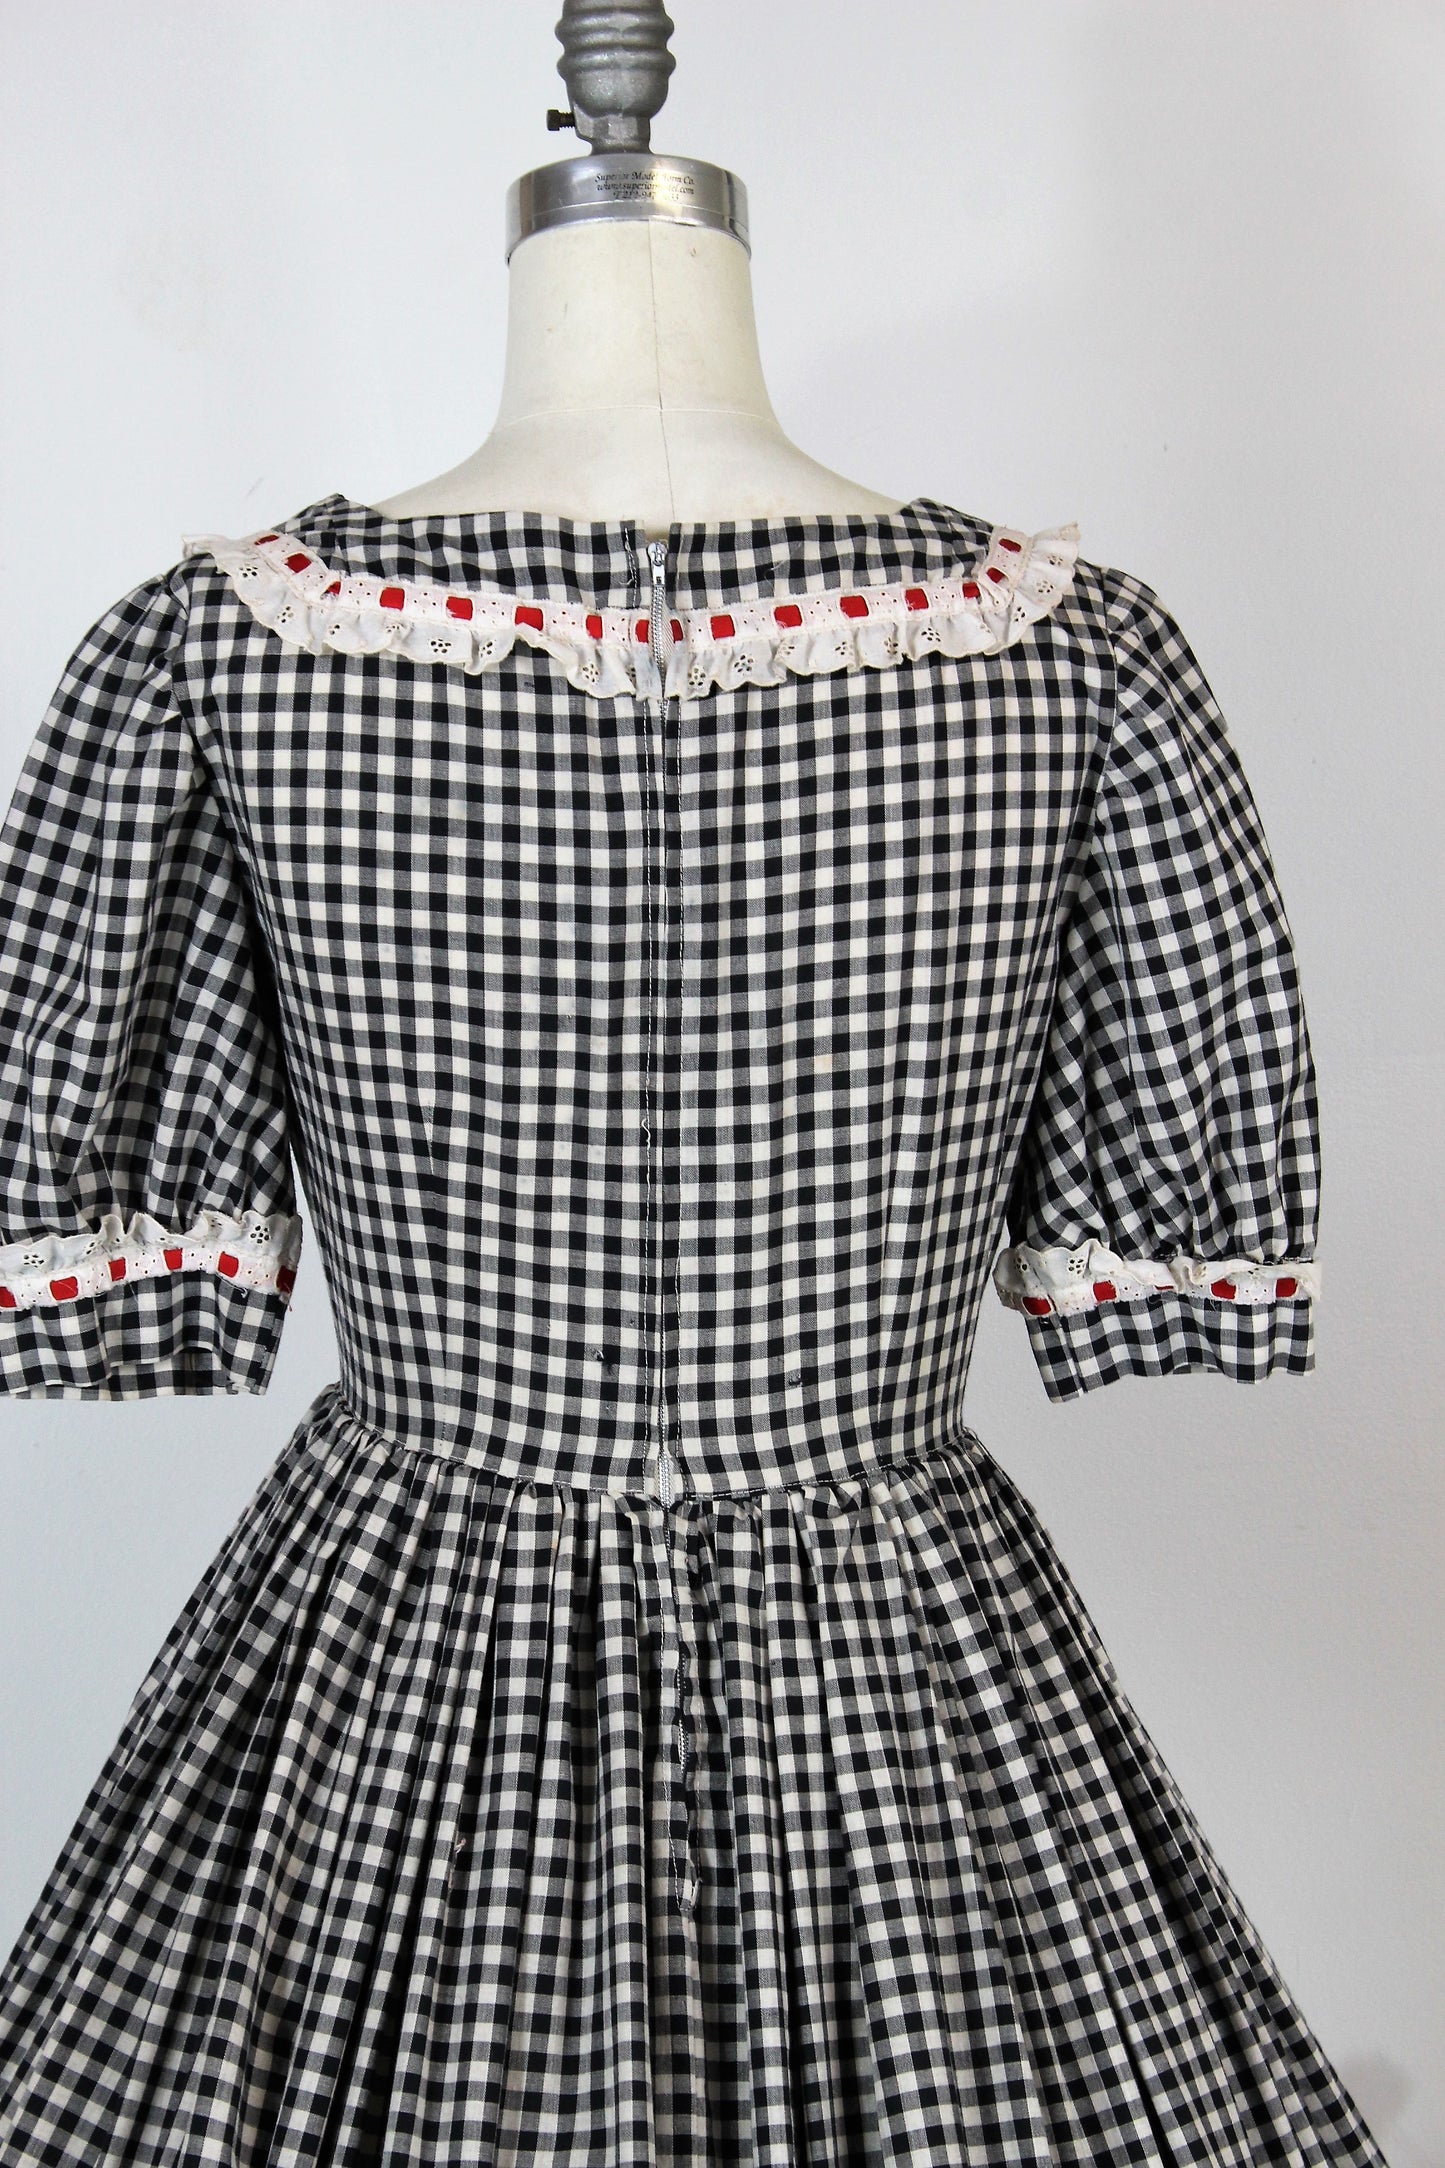 Vintage 1950s Fit and Flare Gingham Dress